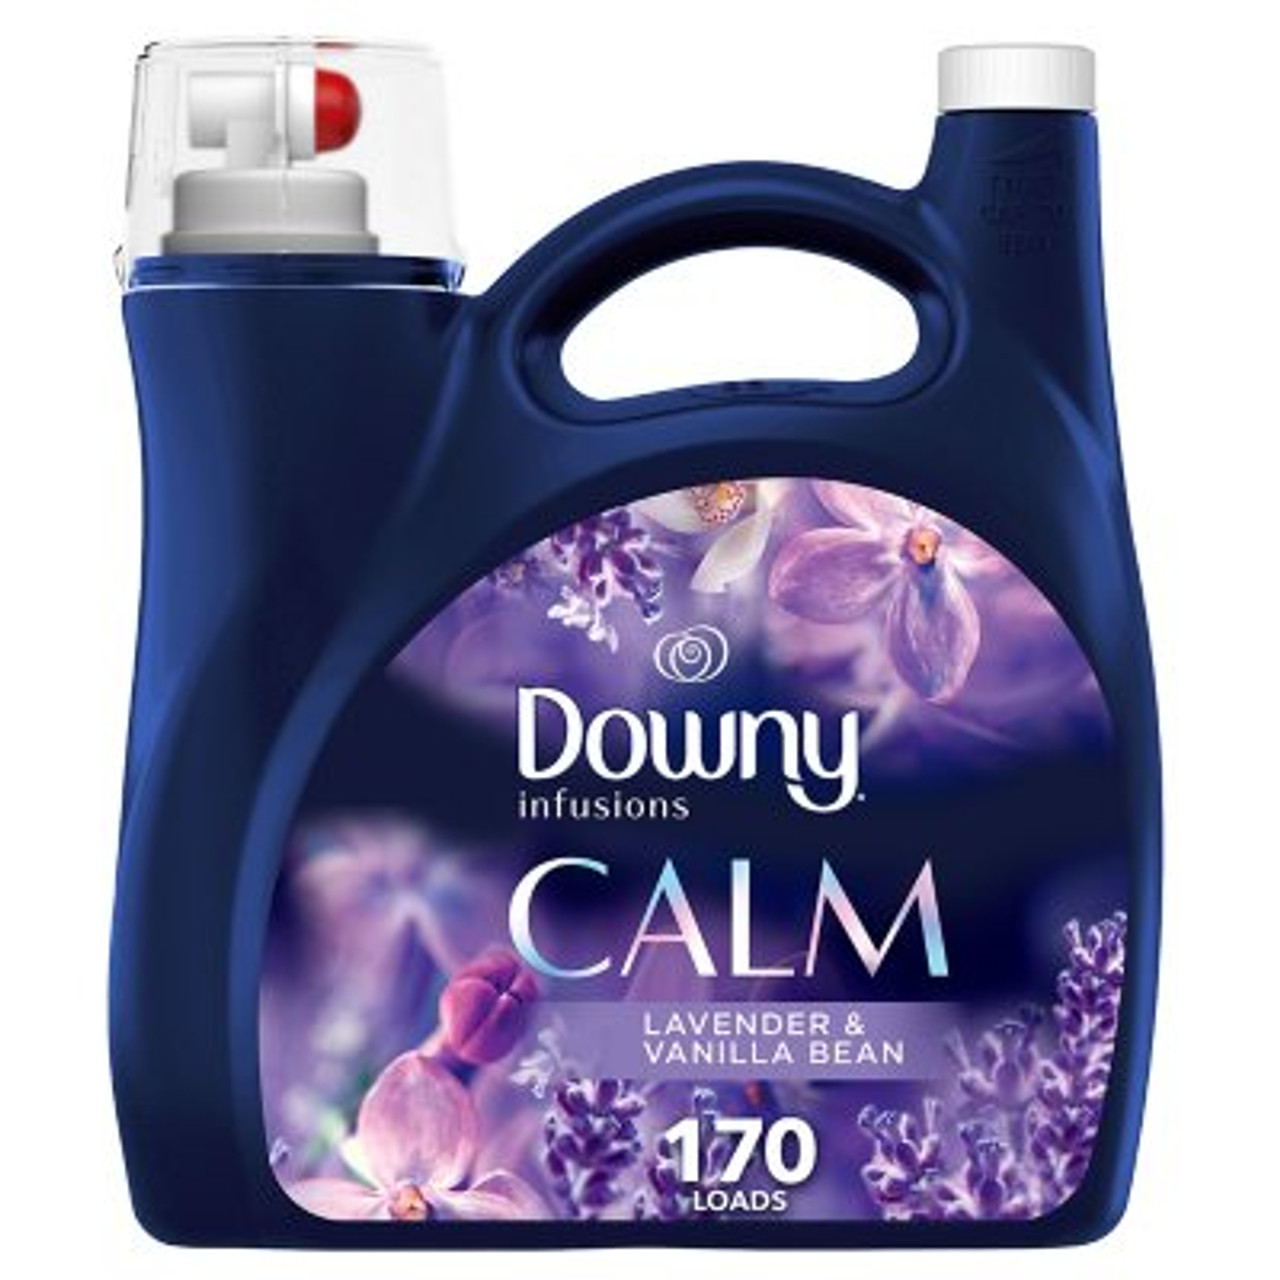 Downy Ultra Infusions Liquid Fabric Conditioner, Calm (170 loads, 115 fl. oz.) - [From 58.00 - Choose pk Qty ] - *Ships from Miami